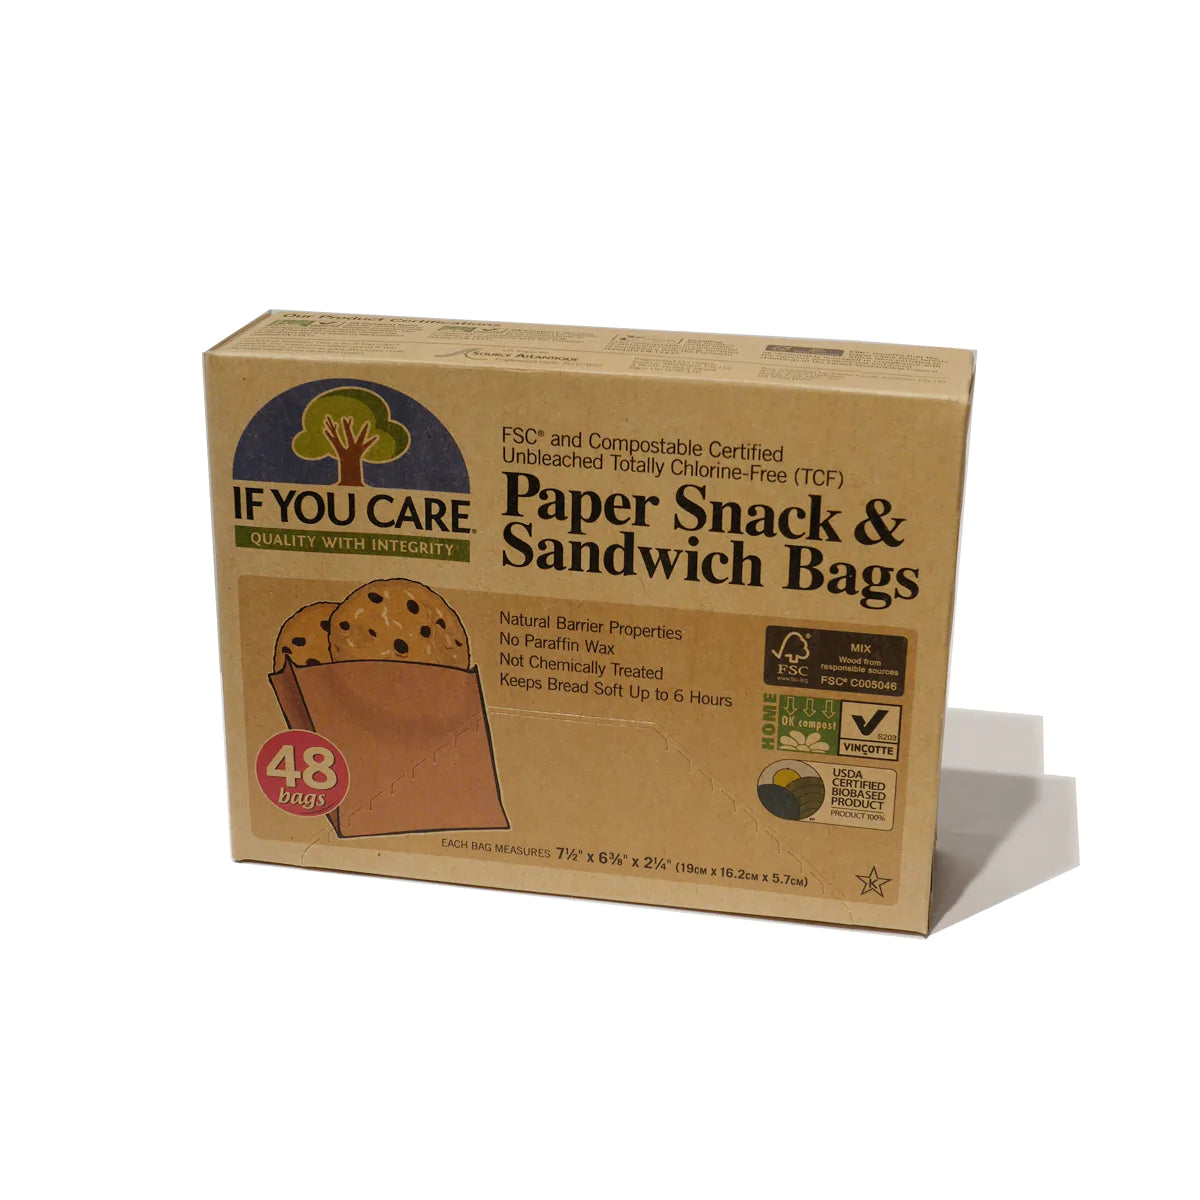 If You Care - Paper Snack & Sandwich Bags, 48 pcs